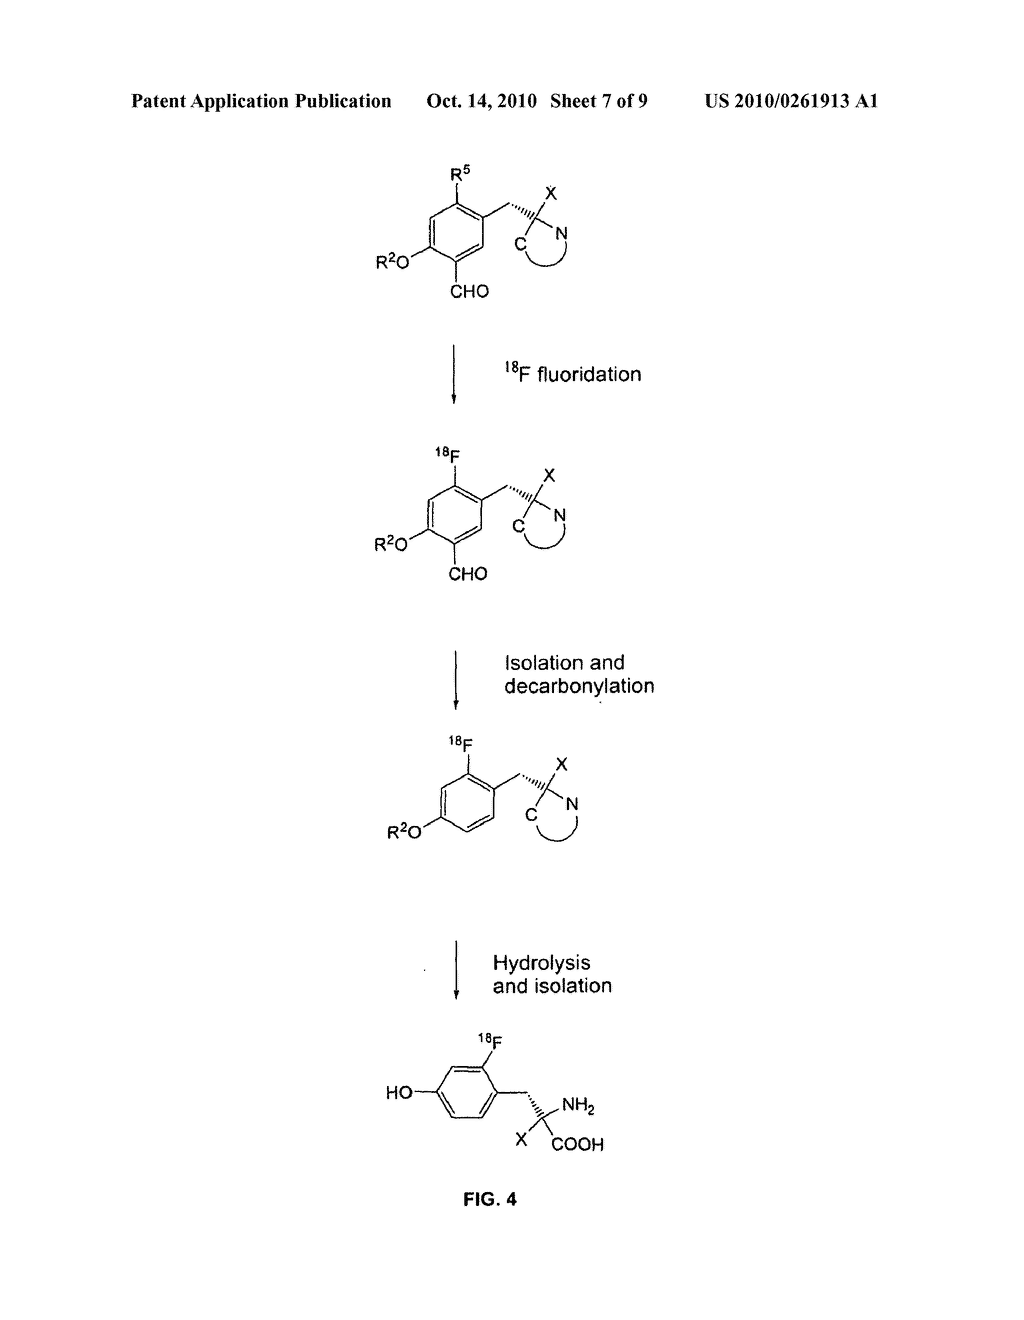 METHOD FOR PRODUCING PRECURSORS FOR L-3,4-DIHYDROXY-6- [18F] FLUOROPHENYL ALAINE AND 2- [18F] FLUORO-L-TYROSINE AND THE ALPHA-METHYLATED DERIVATIVES THEREOF, PRECURSOR, AND METHOD FOR PRODUCING L-3, 4DIHYDROXY-6- [18F] FLUOROPHENYLALANINE AND 2- [18F] FLUORO-L-TYROSINE AND THE ALPHA-METHYLATED DERIVATIVES FROM THE PRECURSOR - diagram, schematic, and image 08